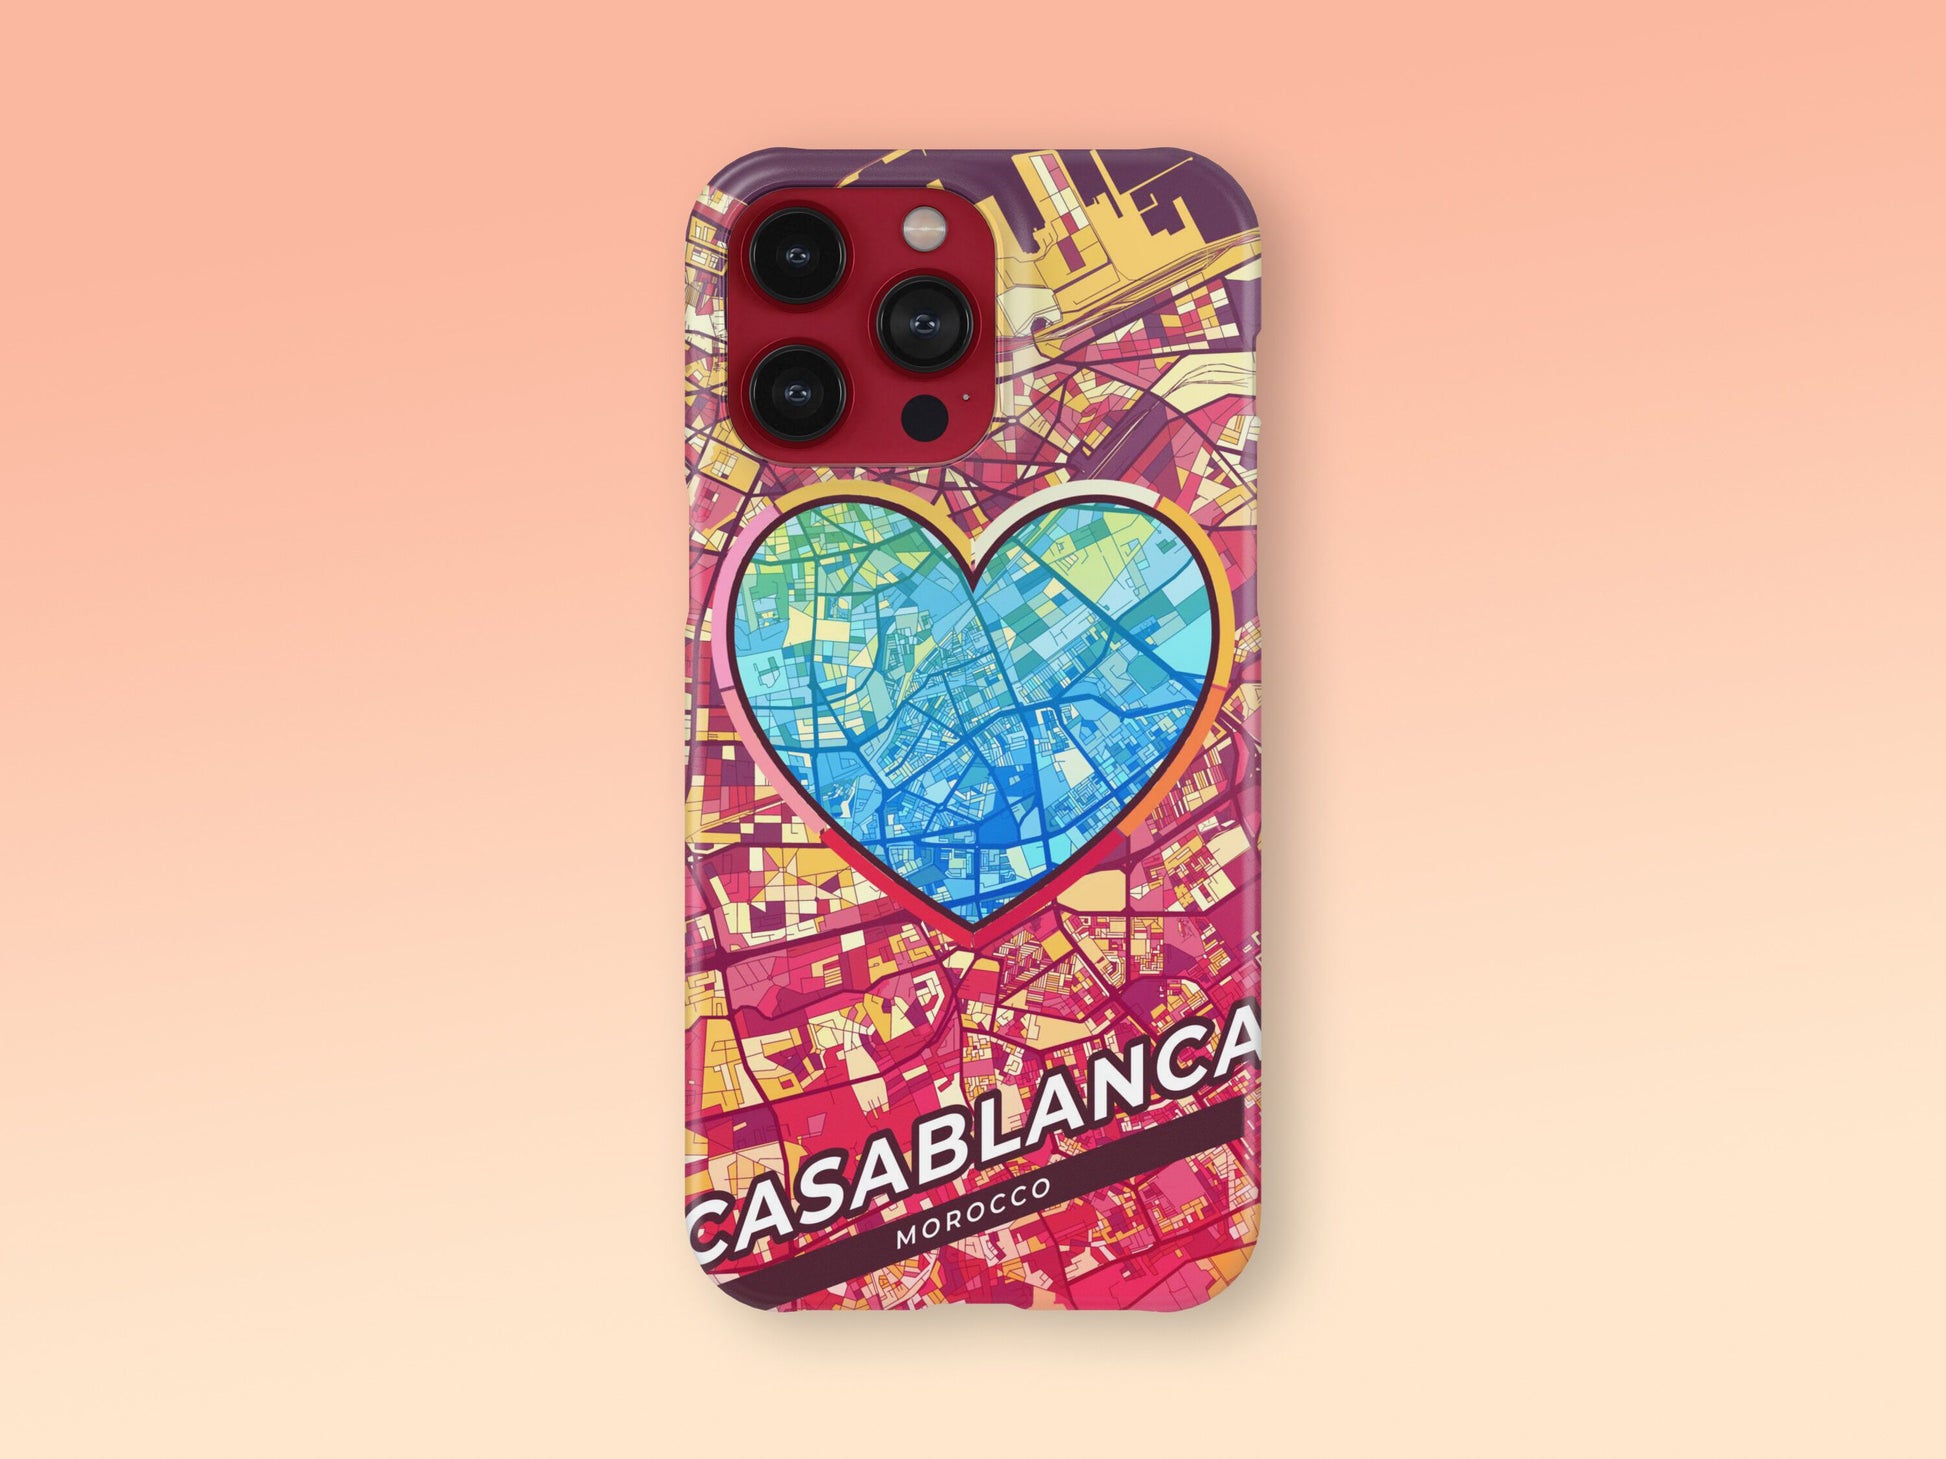 Casablanca Morocco slim phone case with colorful icon. Birthday, wedding or housewarming gift. Couple match cases. 2